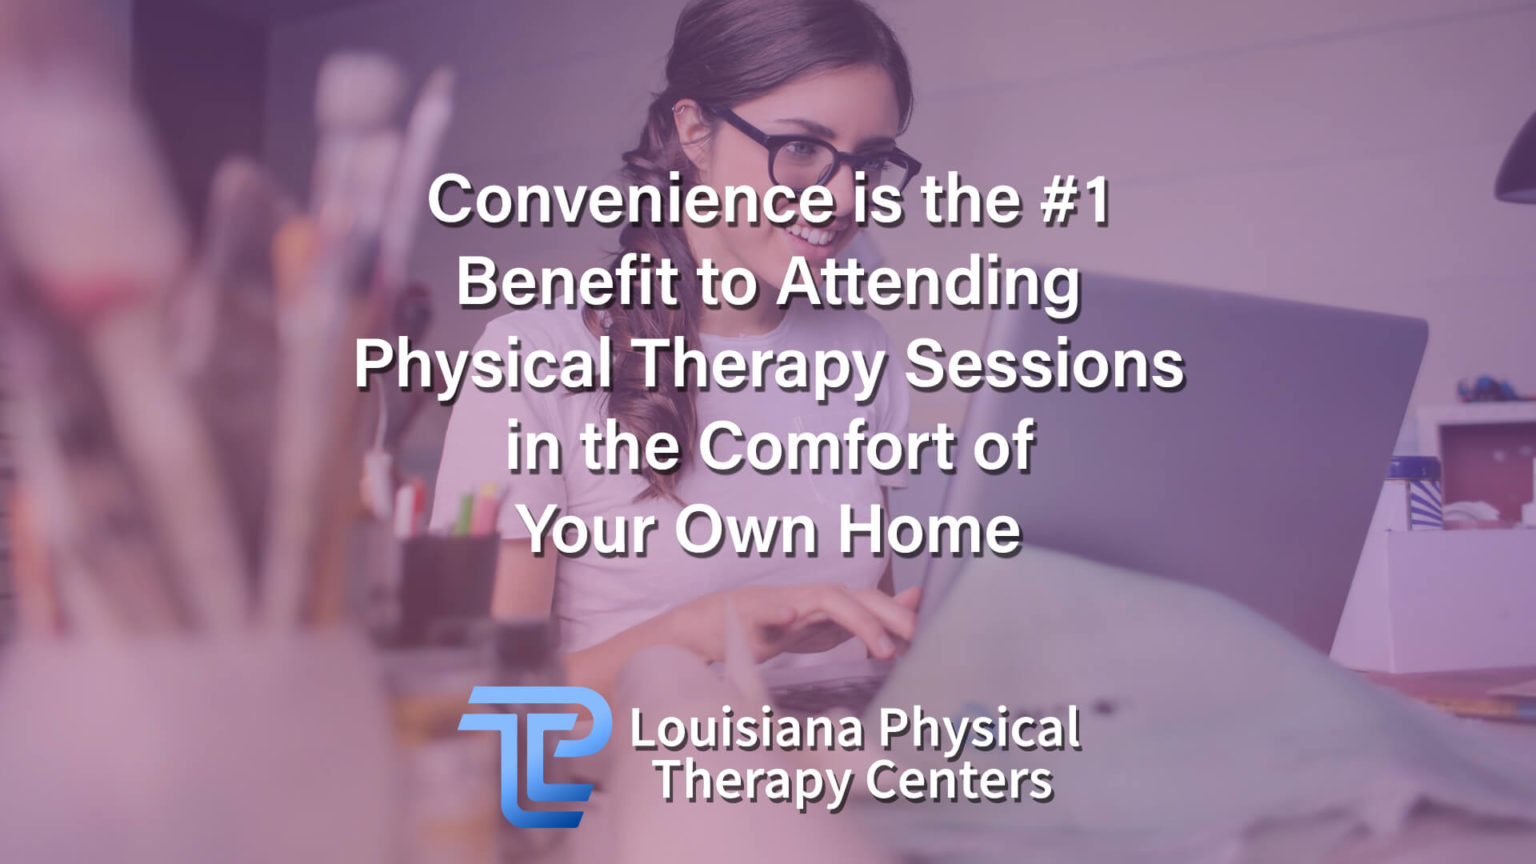 physical therapy session cost